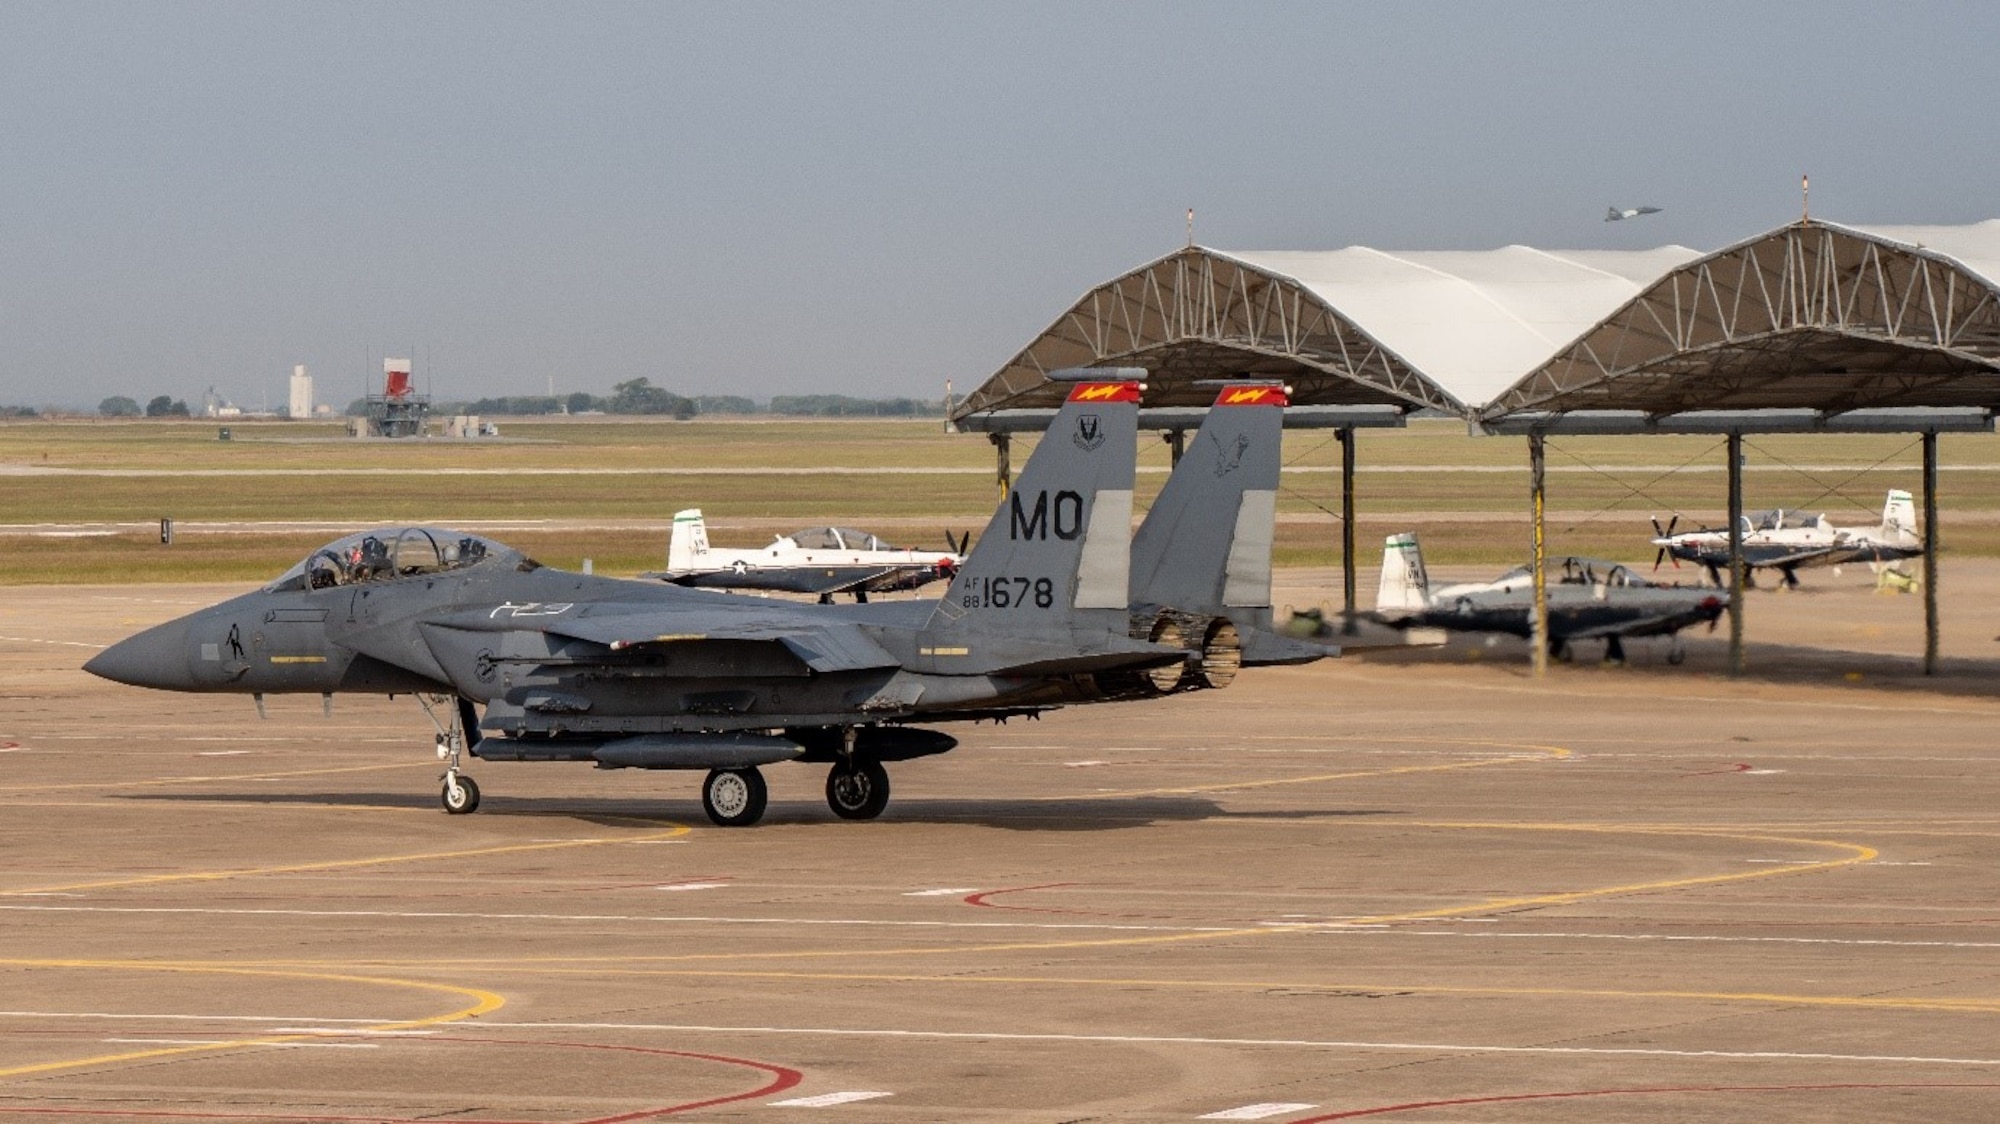 An F-15E Strike Eagle from the 389th Fighter Squadron taxis for takeoff at Vance AFB while student pilots start and taxi in the T-6 Texan II pilot trainer. (U.S. Air Force photo by Maj. Mark Calendine)